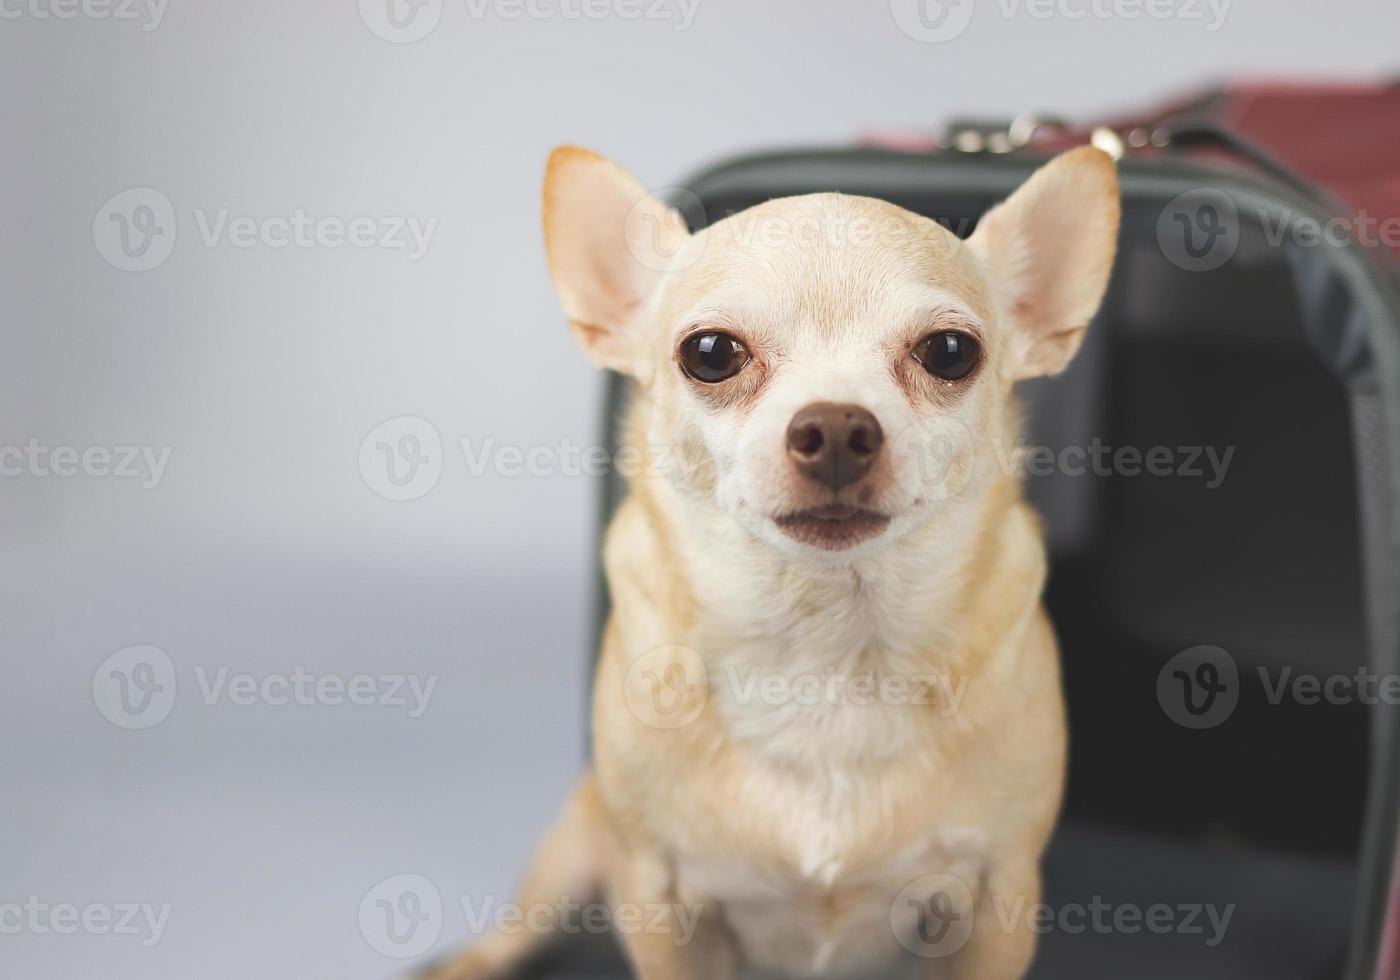 brown chihuahua dog sitting and looking at camera in front of  traveler pet carrier bag on white  background with copy space.  Safe travel with animals. photo